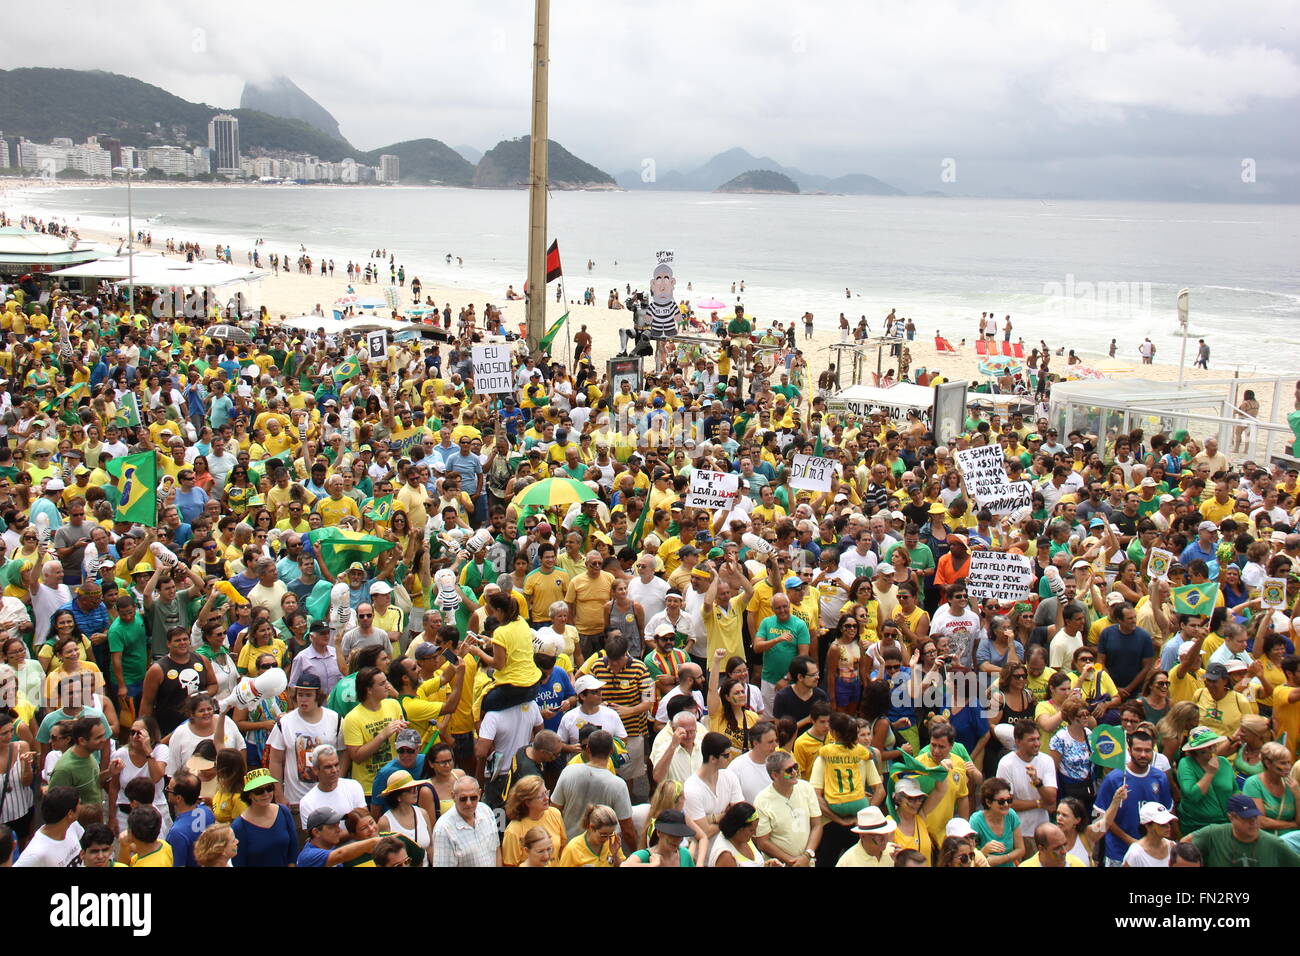 Rio de Janeiro, Brazil, 13 March 2016: Millions of Brazilians took to the streets to protest against the government of Dilma Rousseff and ask for her impeachment. In Rio de Janeiro the demonstrations took place on Copacabana Beach waterfront and drew thousands of people and sound cars. From the windows of the buildings many people also supported the motion calling for the out of Dilma Rousseff and the end of corruption in Brazil. Credit:  Luiz Souza/Alamy Live News Stock Photo